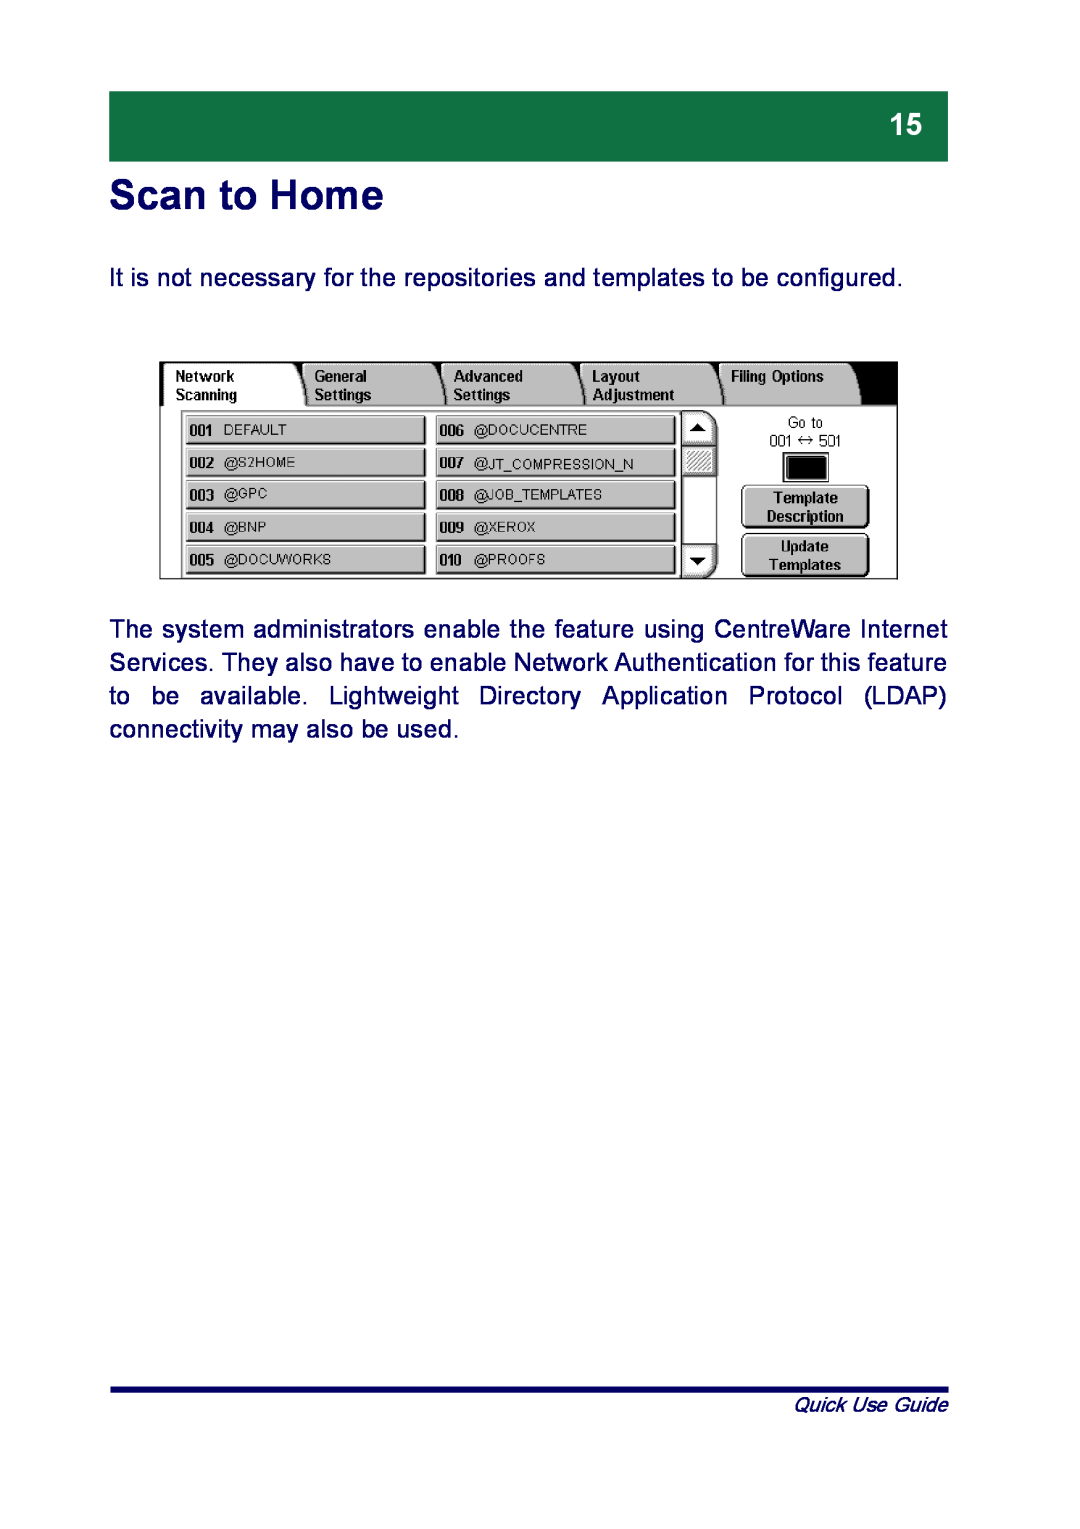 Xerox ME3612E4-1, XT3008EN0-2 manual Scan to Home, It is not necessary for the repositories and templates to be configured 